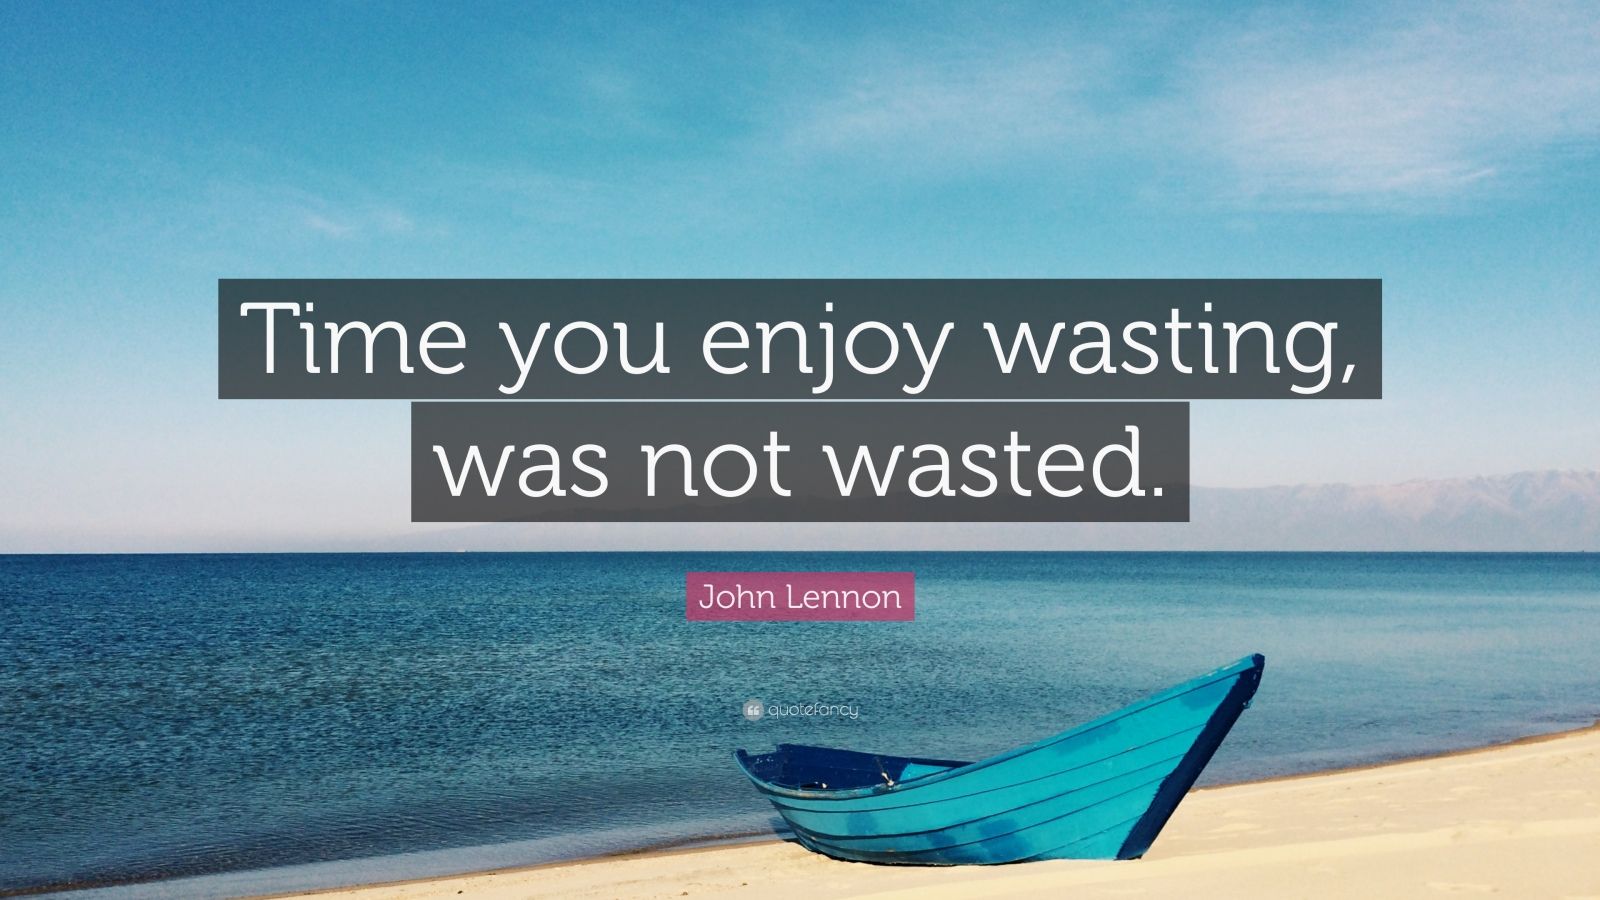 John Lennon Quote: “Time you enjoy wasting, was not wasted.” (28